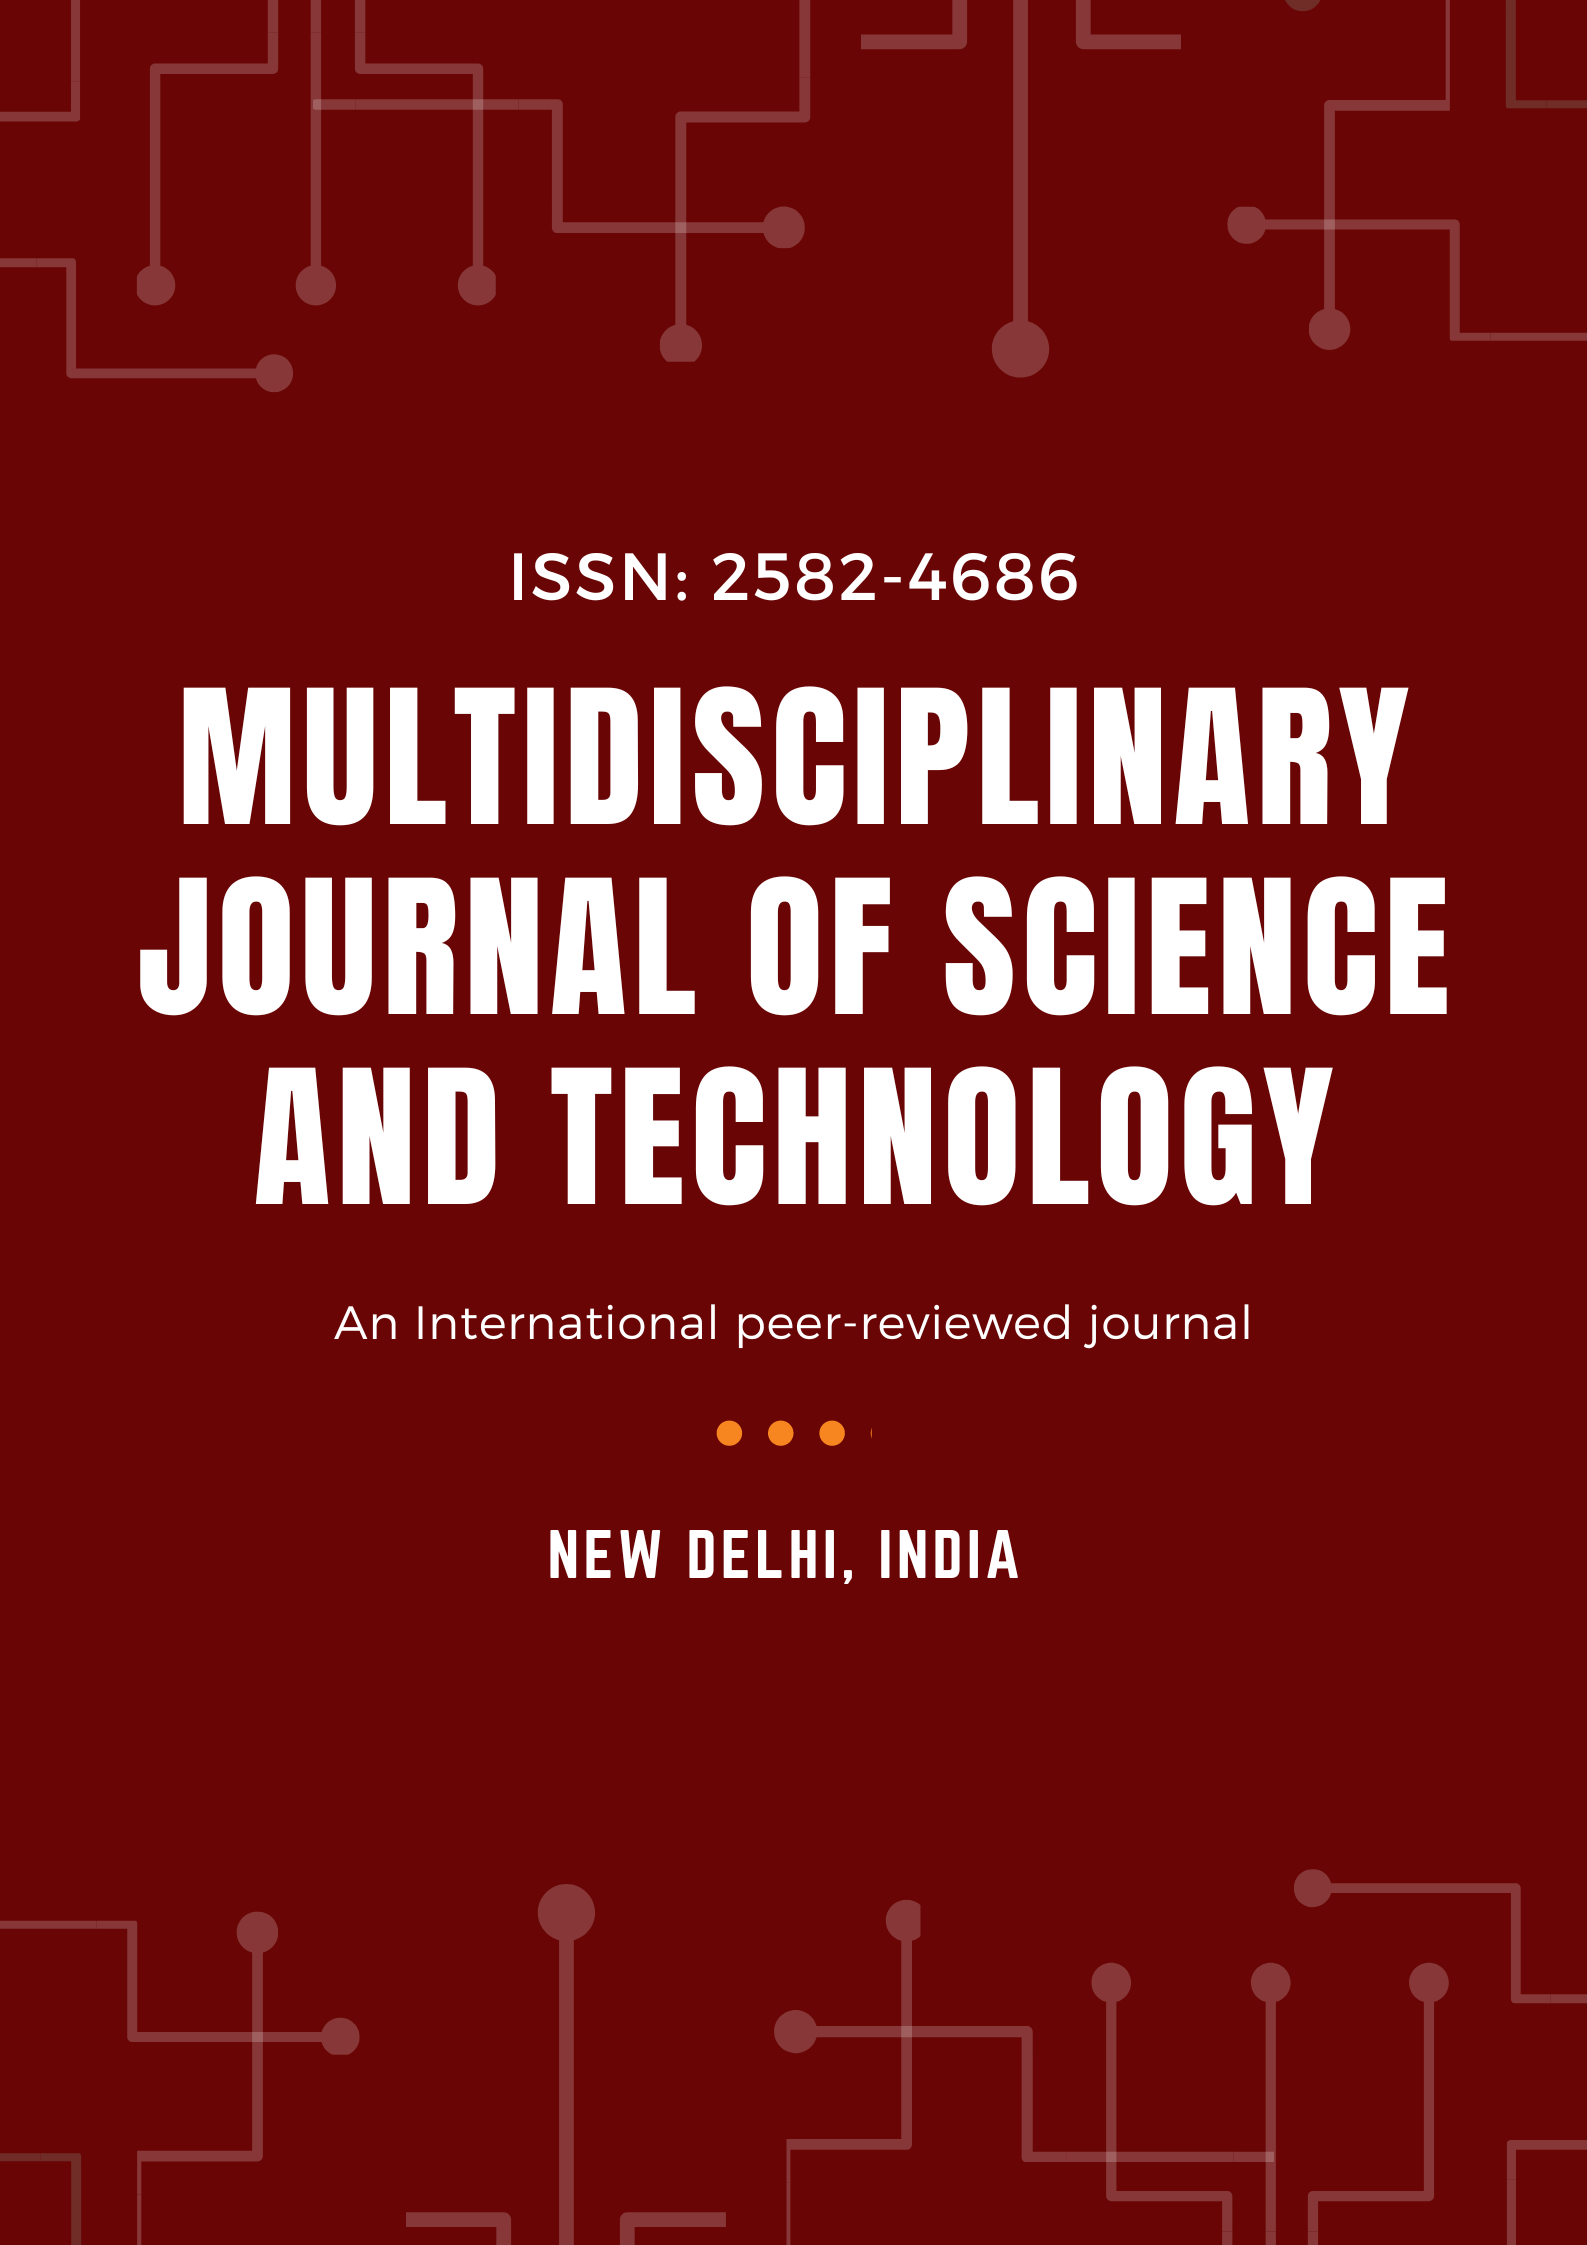                         View Vol. 1 No. 2 (2021): Multidisciplinary Journal of Science and Technology
                    